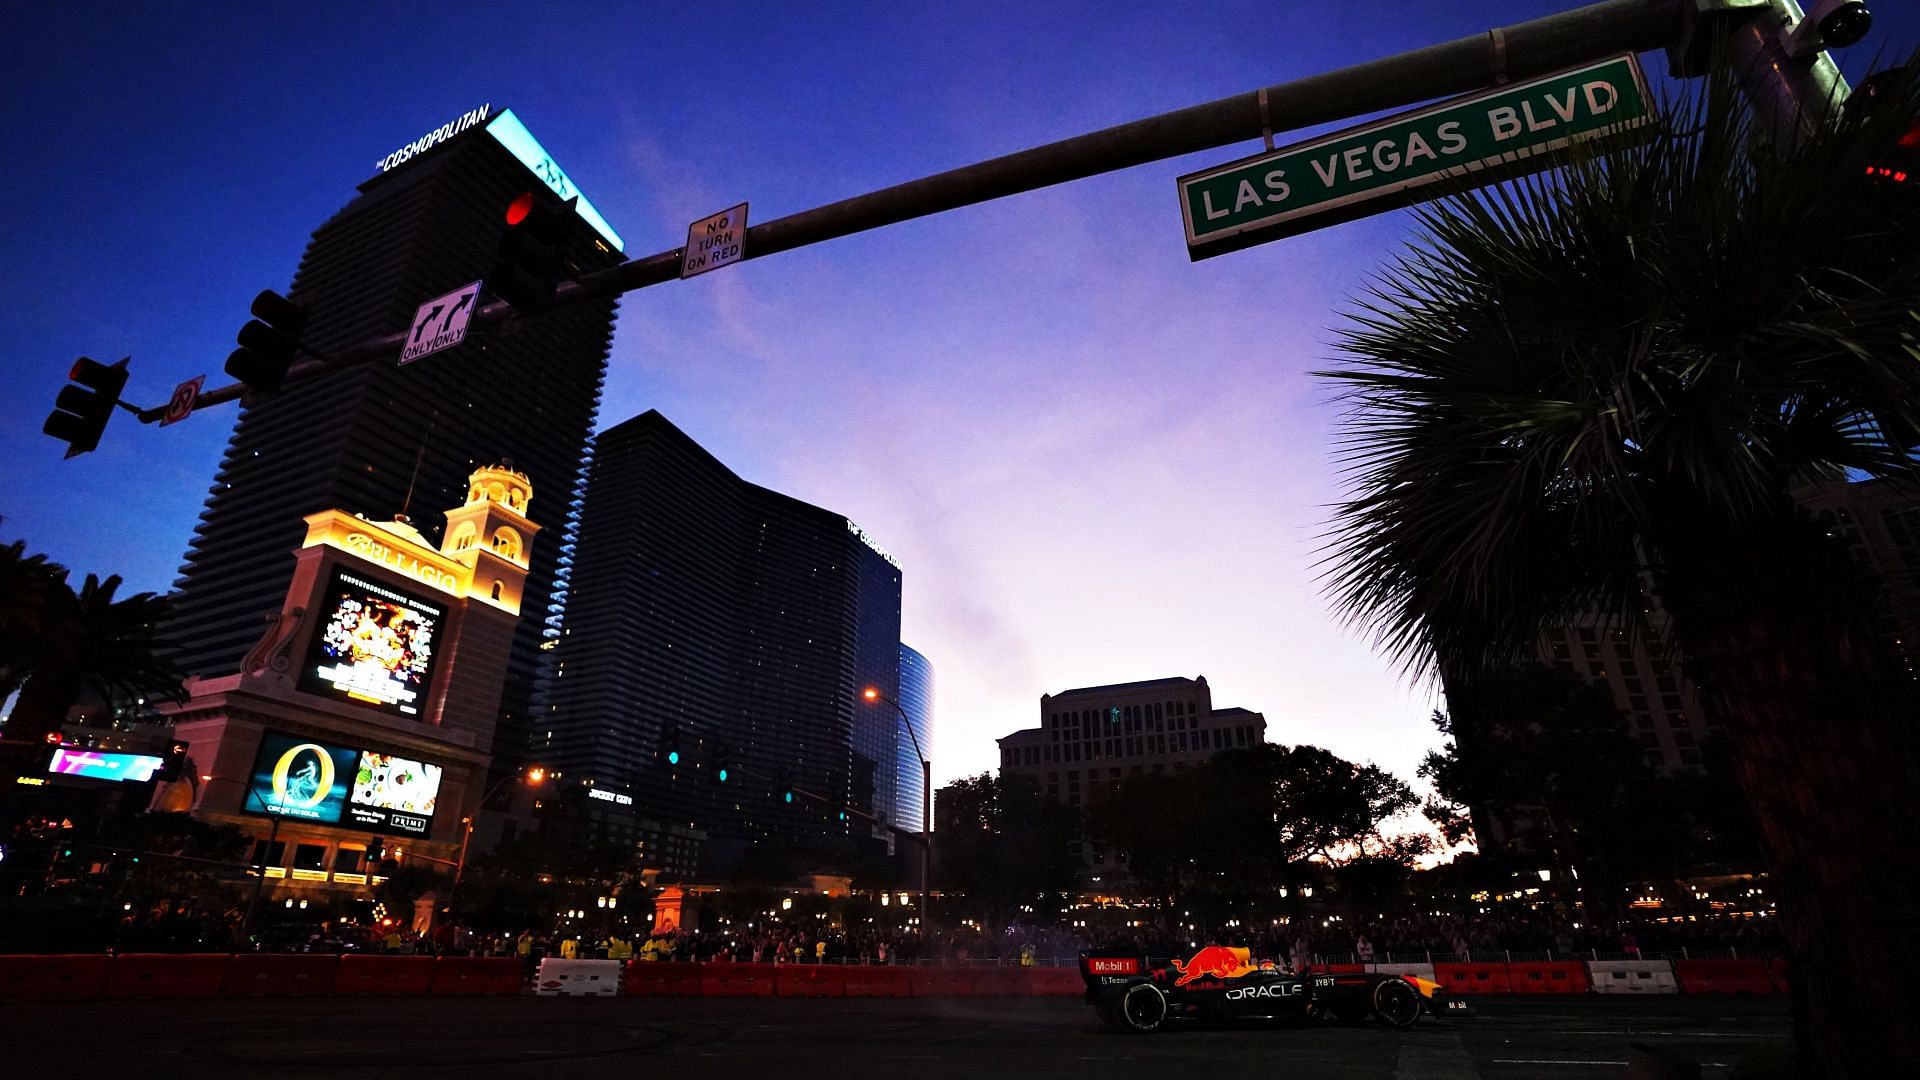 A view of the Las Vegas Boulevard and Red Bull driven by Sergio Perez